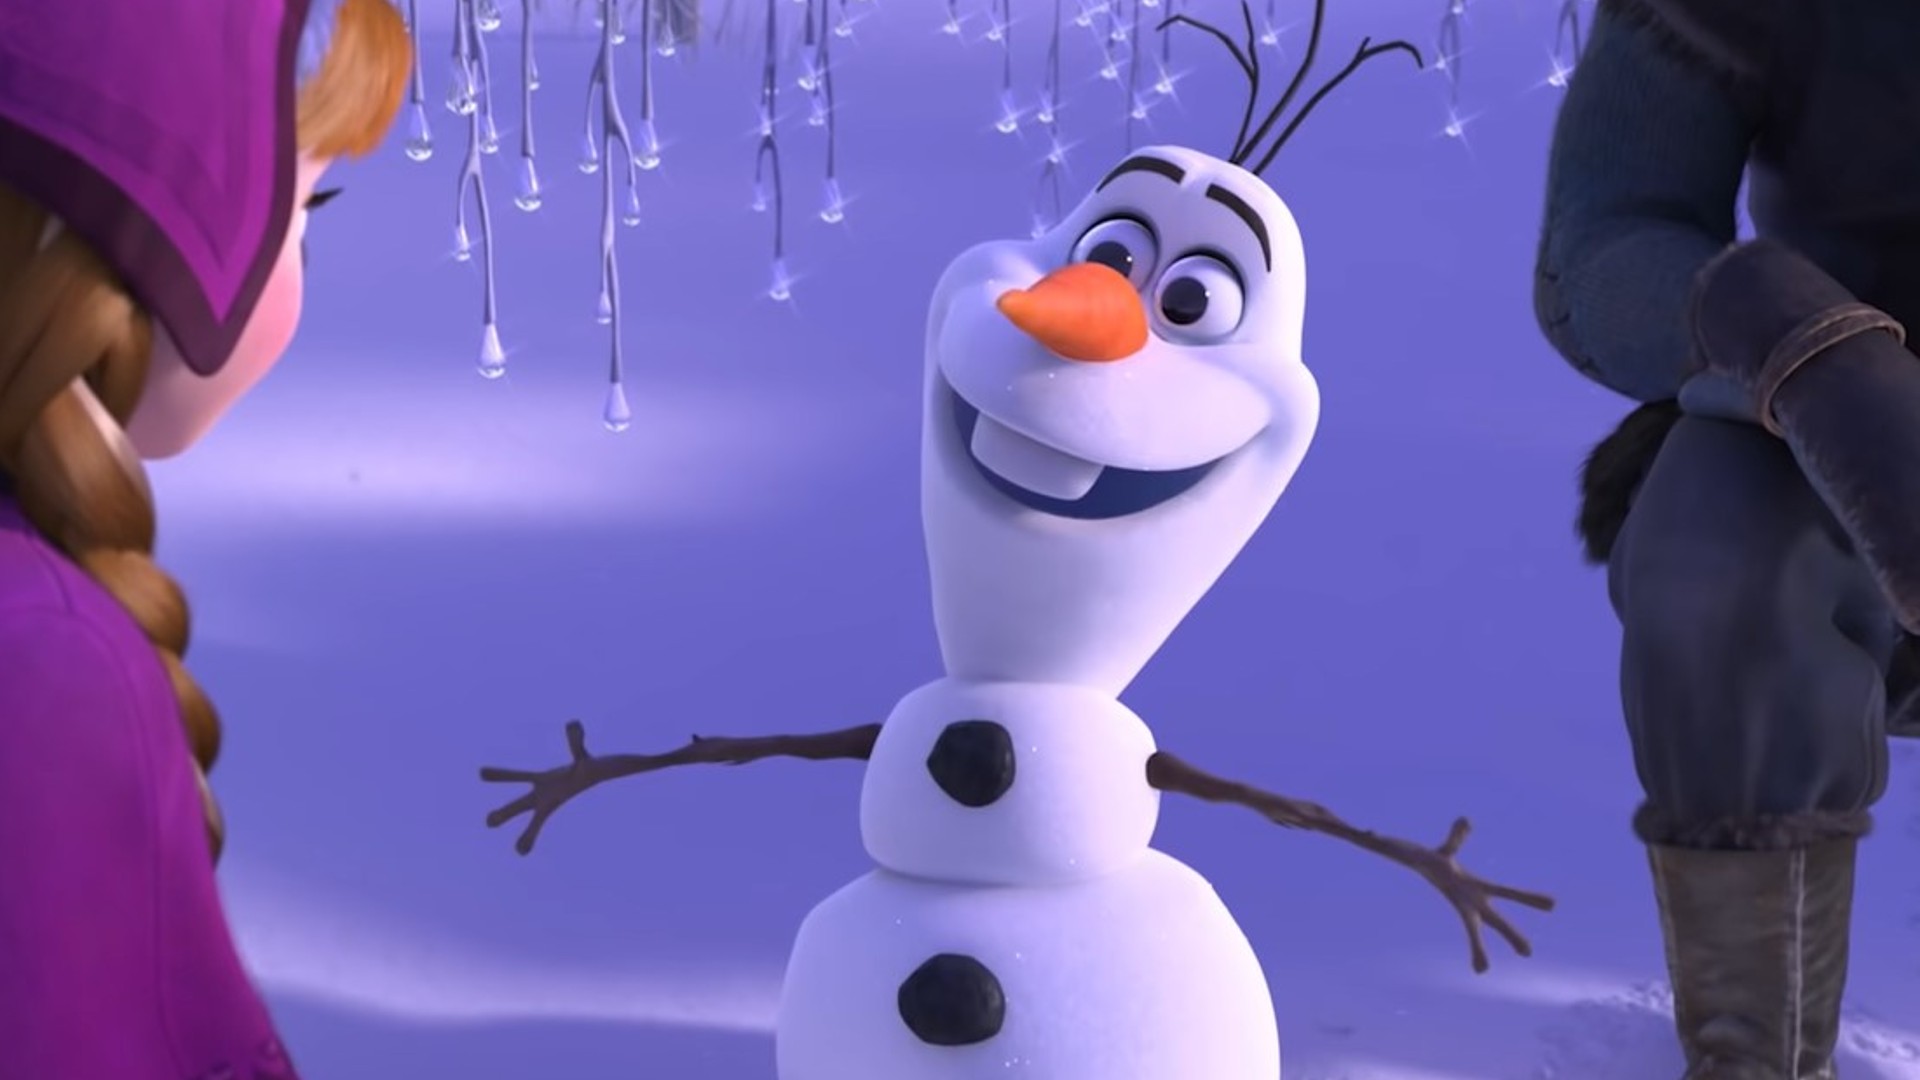 Frozen co-director reveals their initial feedback for the Disney classic:  get rid of Olaf